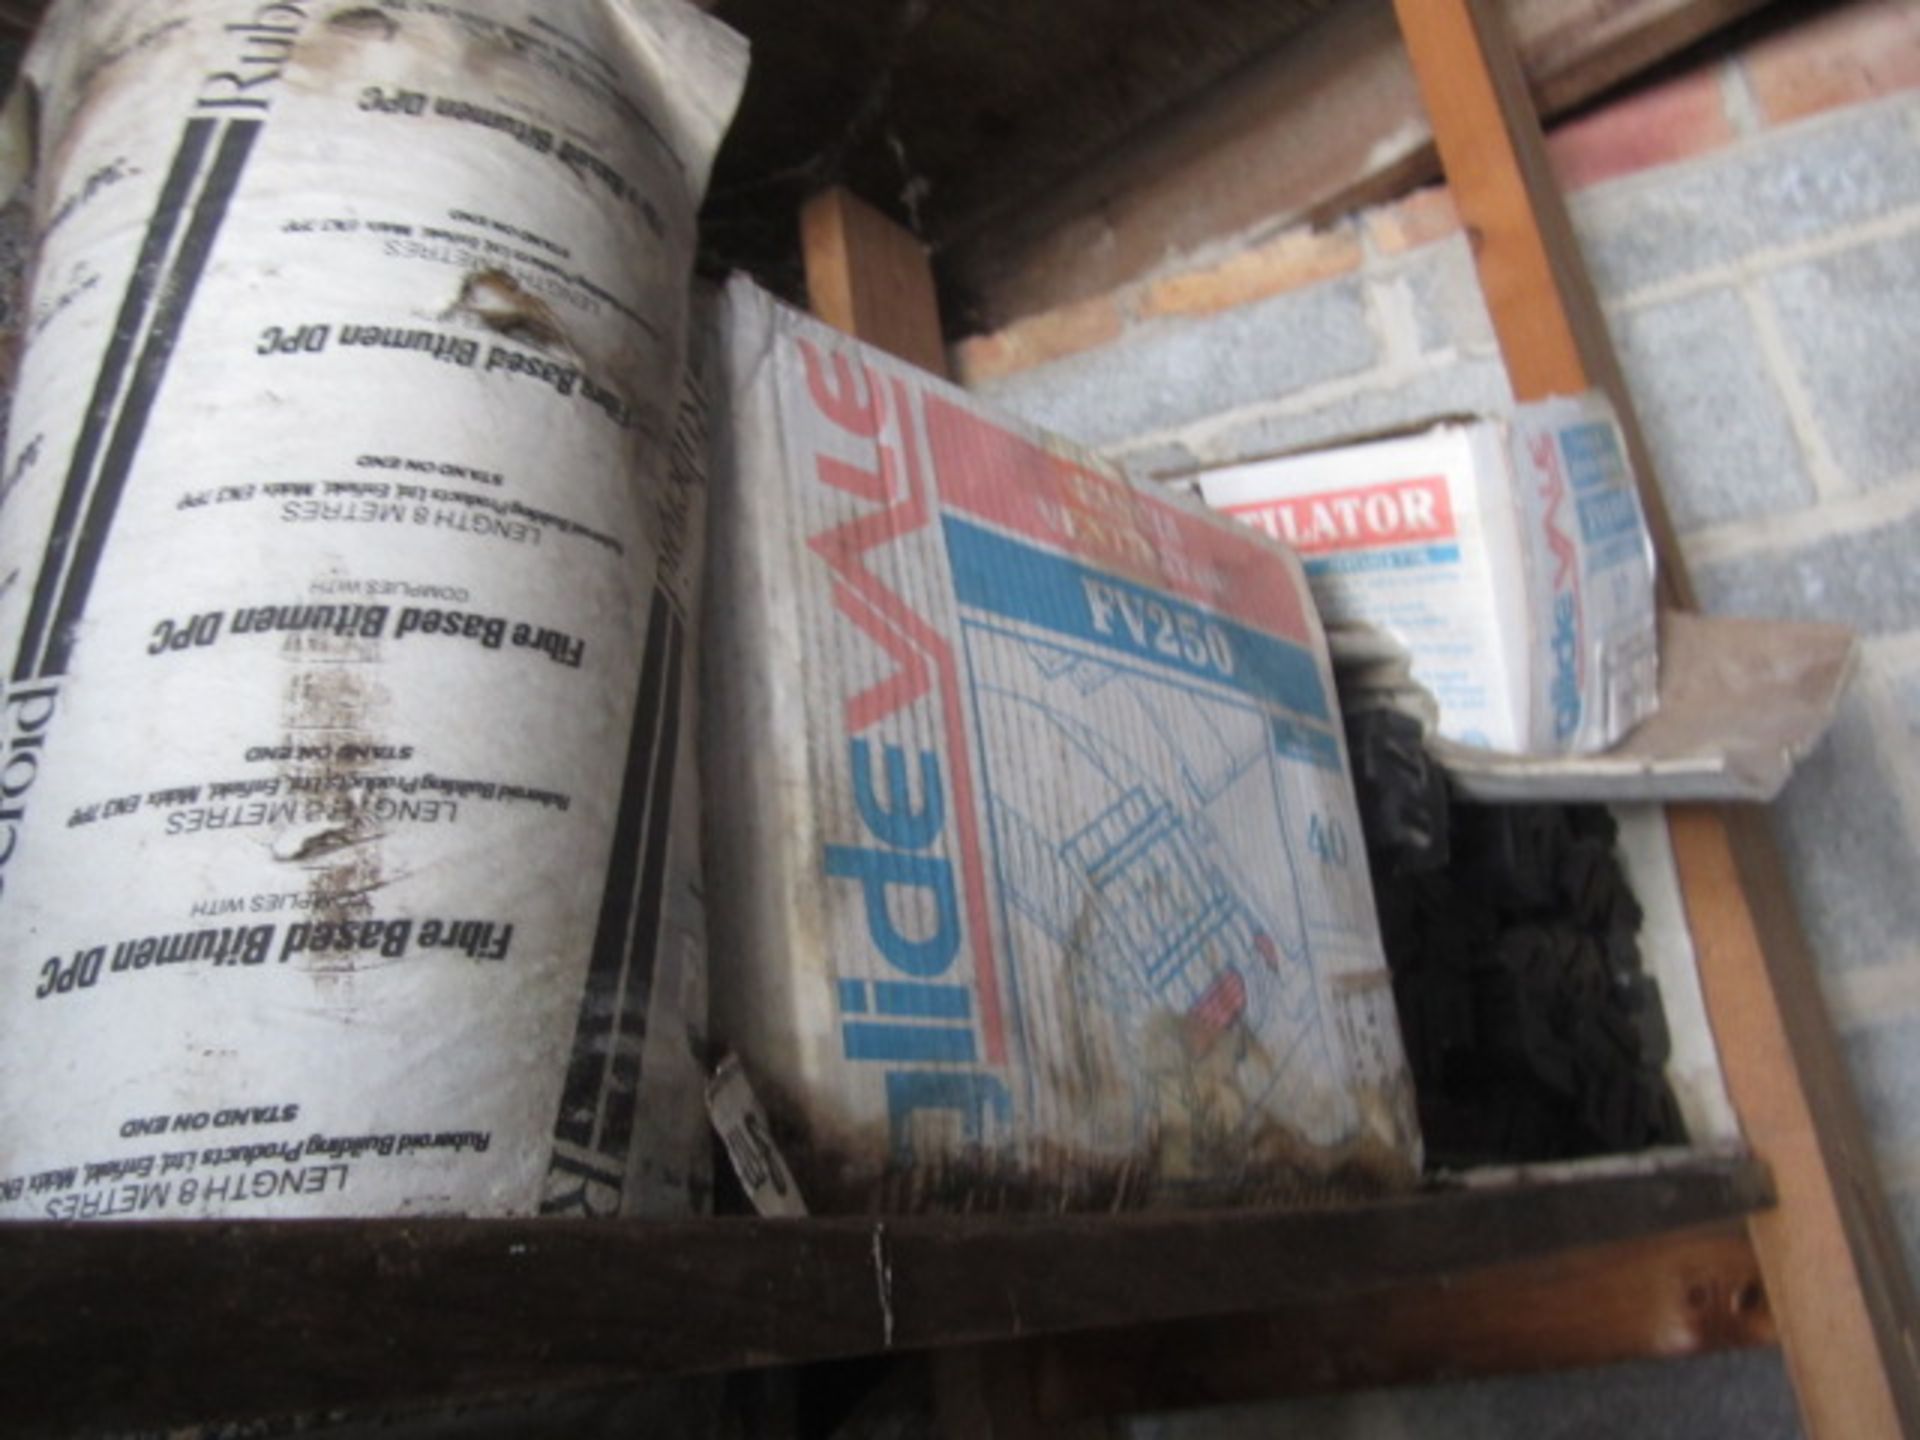 Contents of rack including assorted reels of damp proof course, sub floor Compound, adhesive seal, - Image 11 of 11